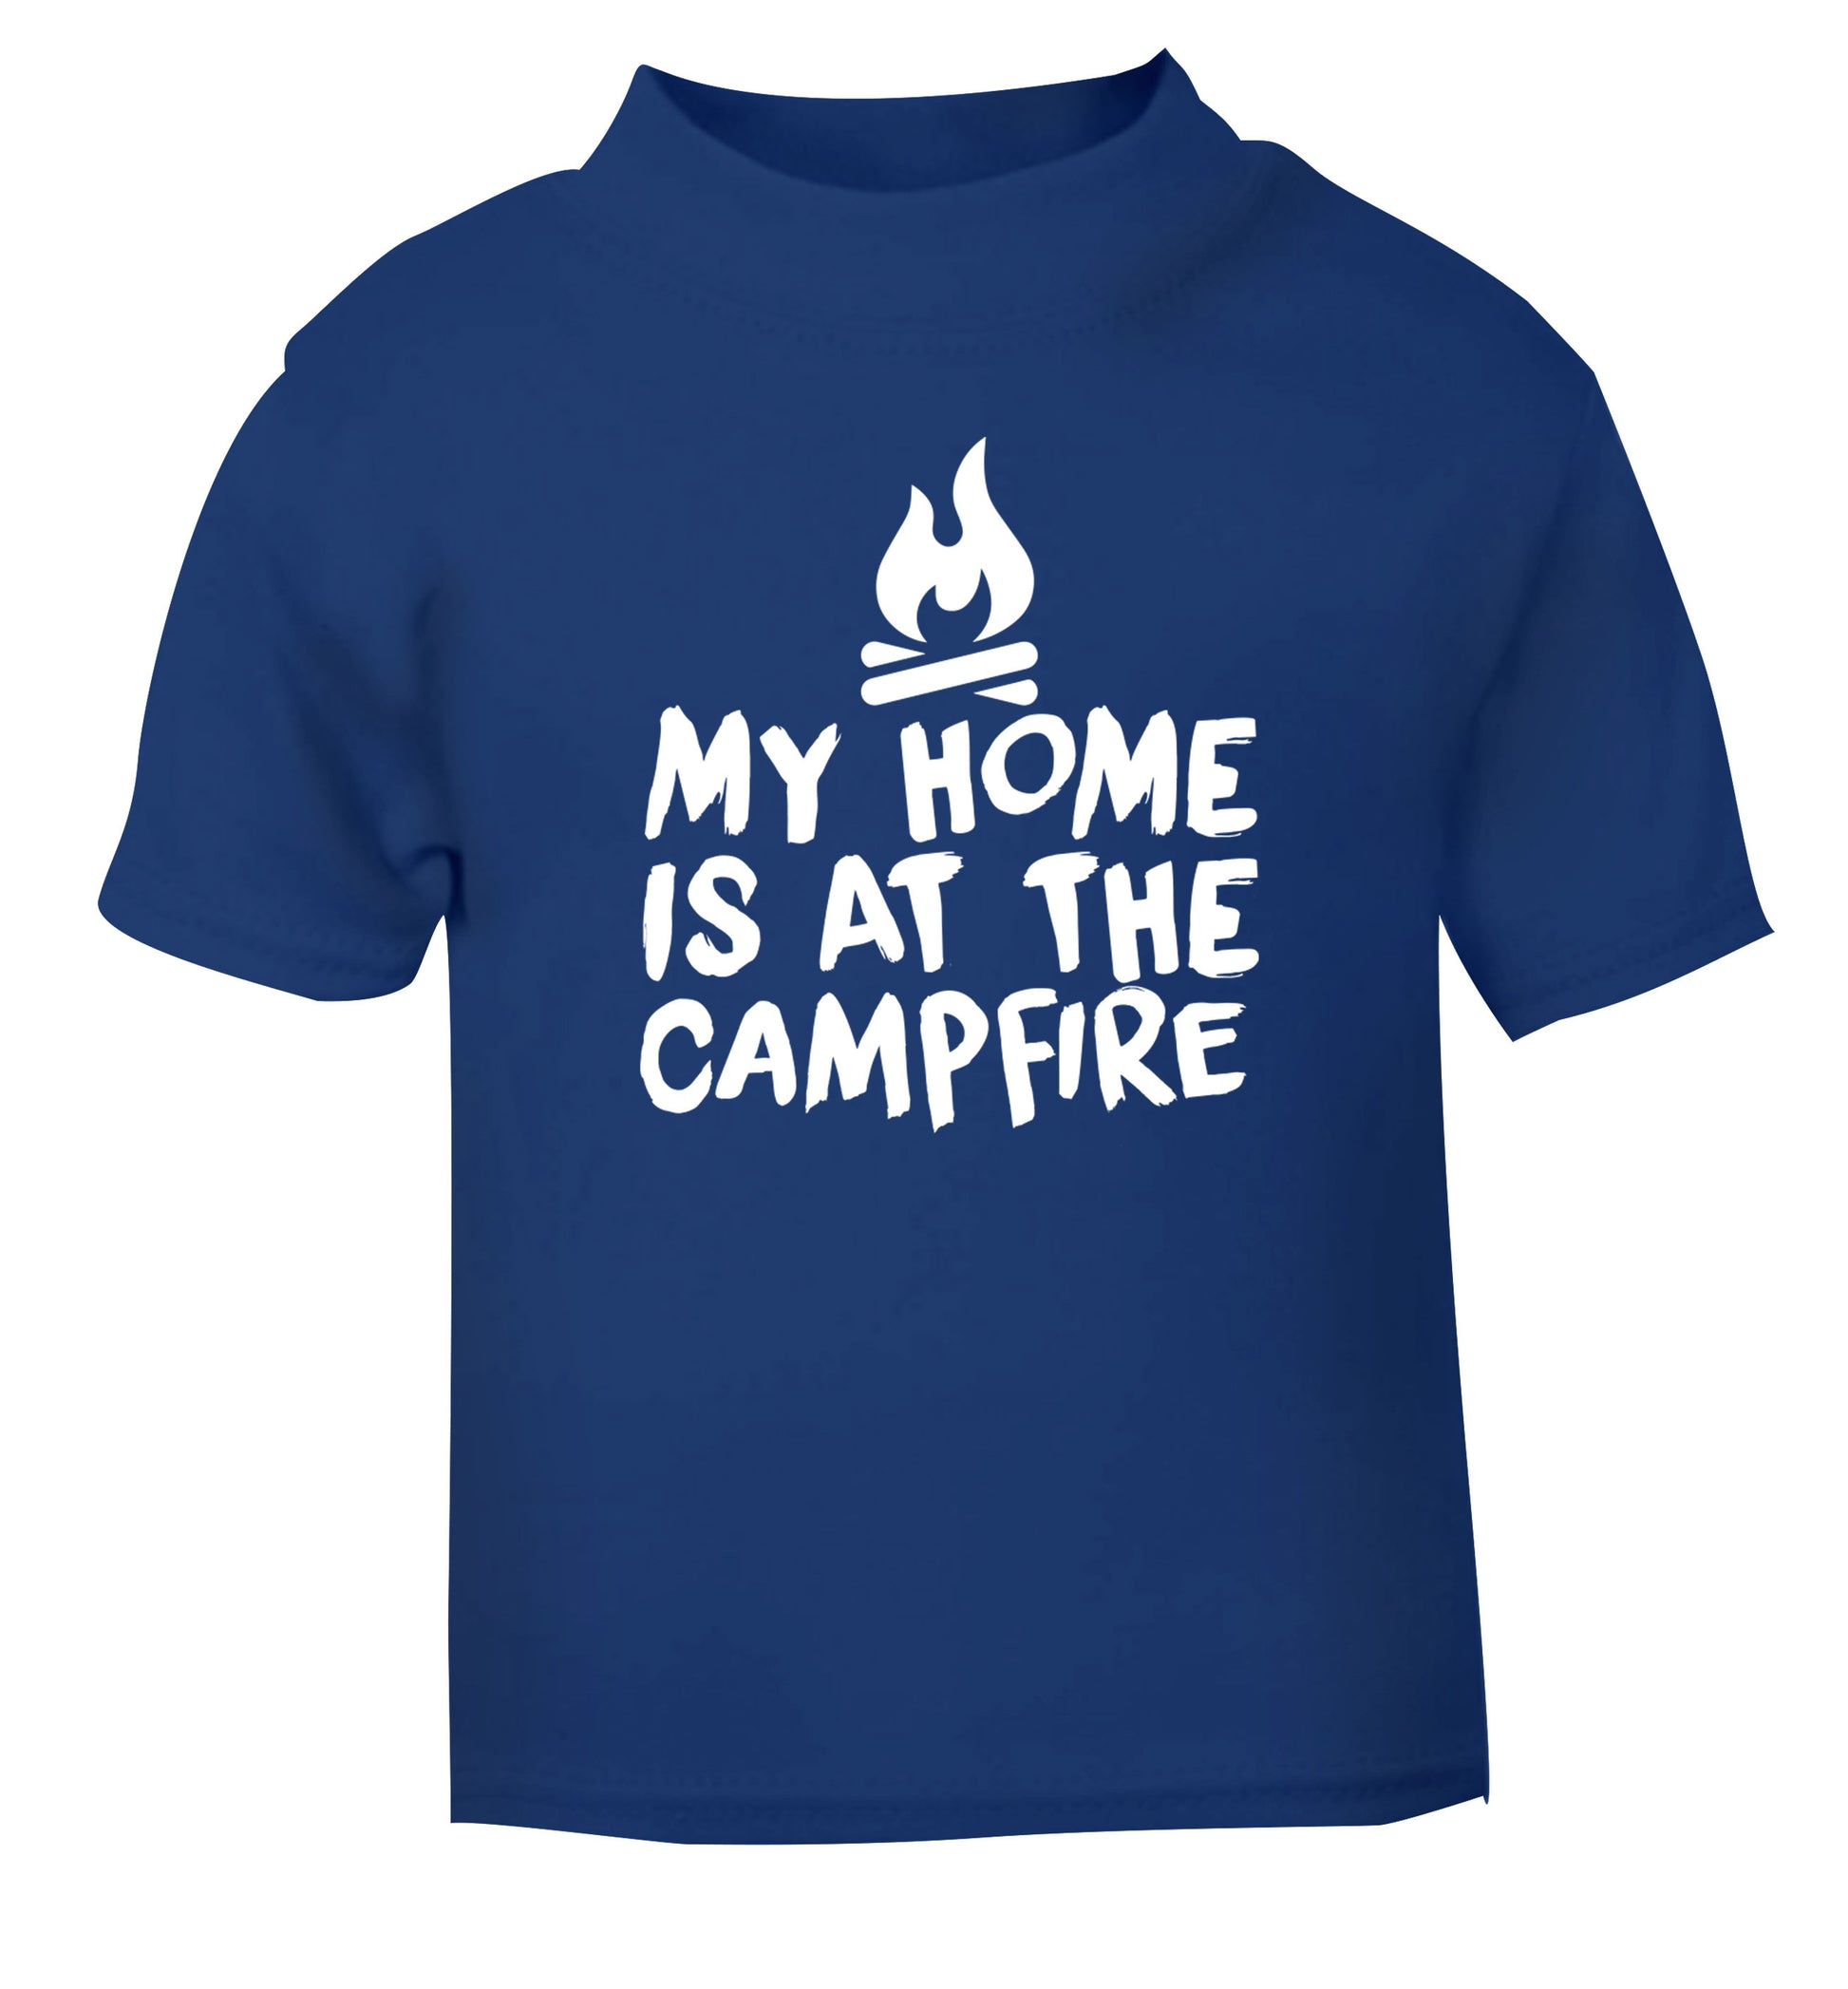 My home is at the campfire blue Baby Toddler Tshirt 2 Years